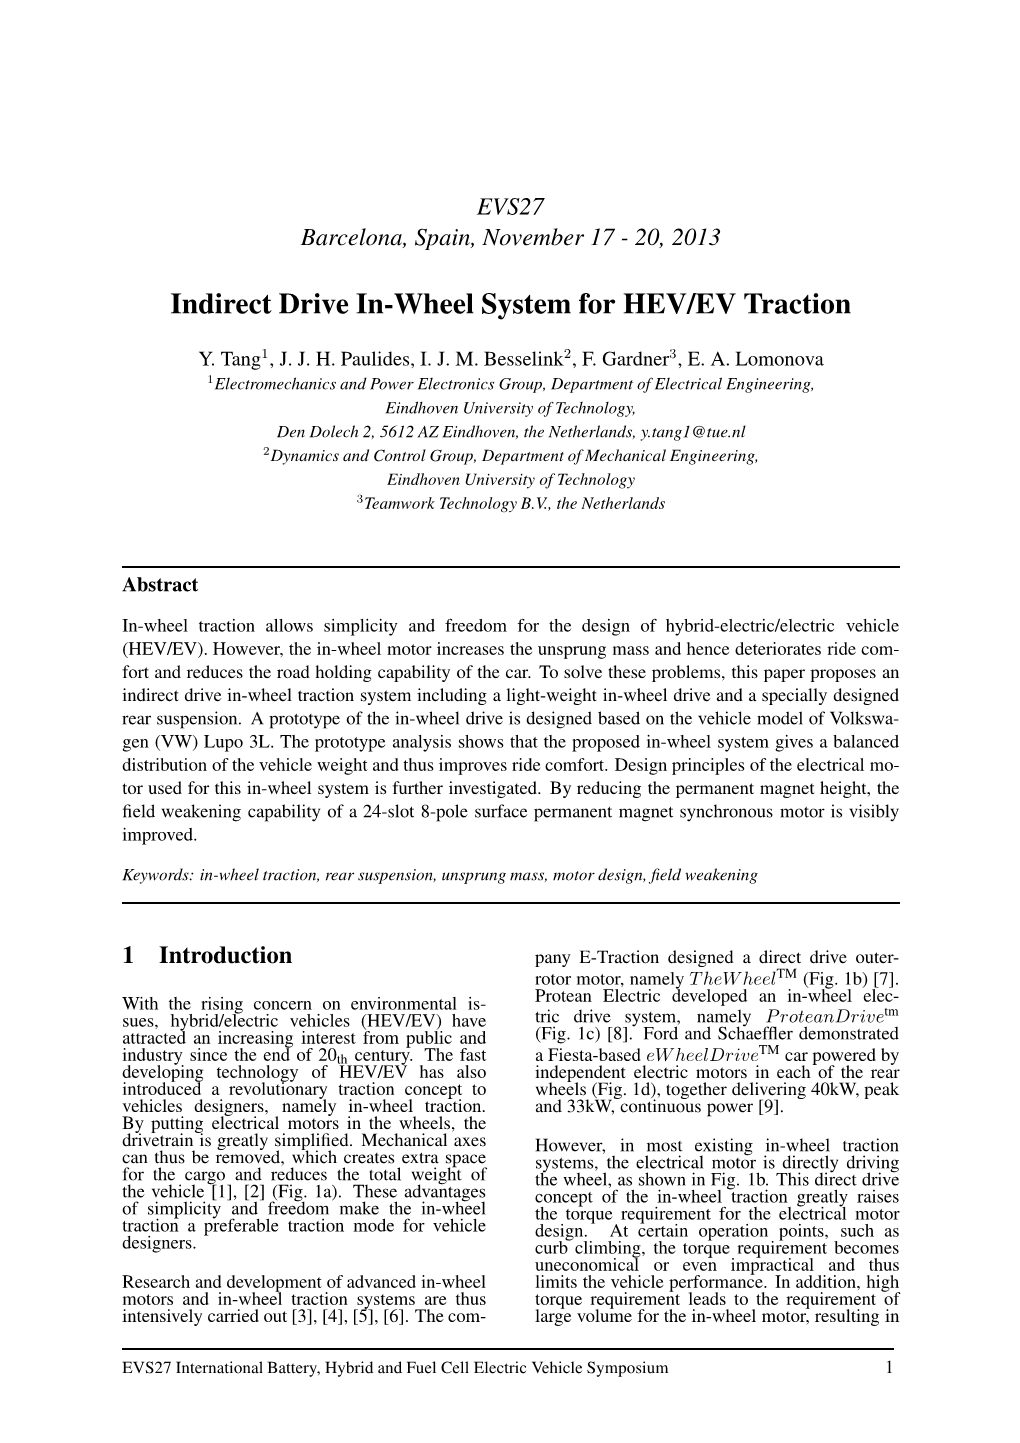 Indirect Drive In-Wheel System for HEV/EV Traction